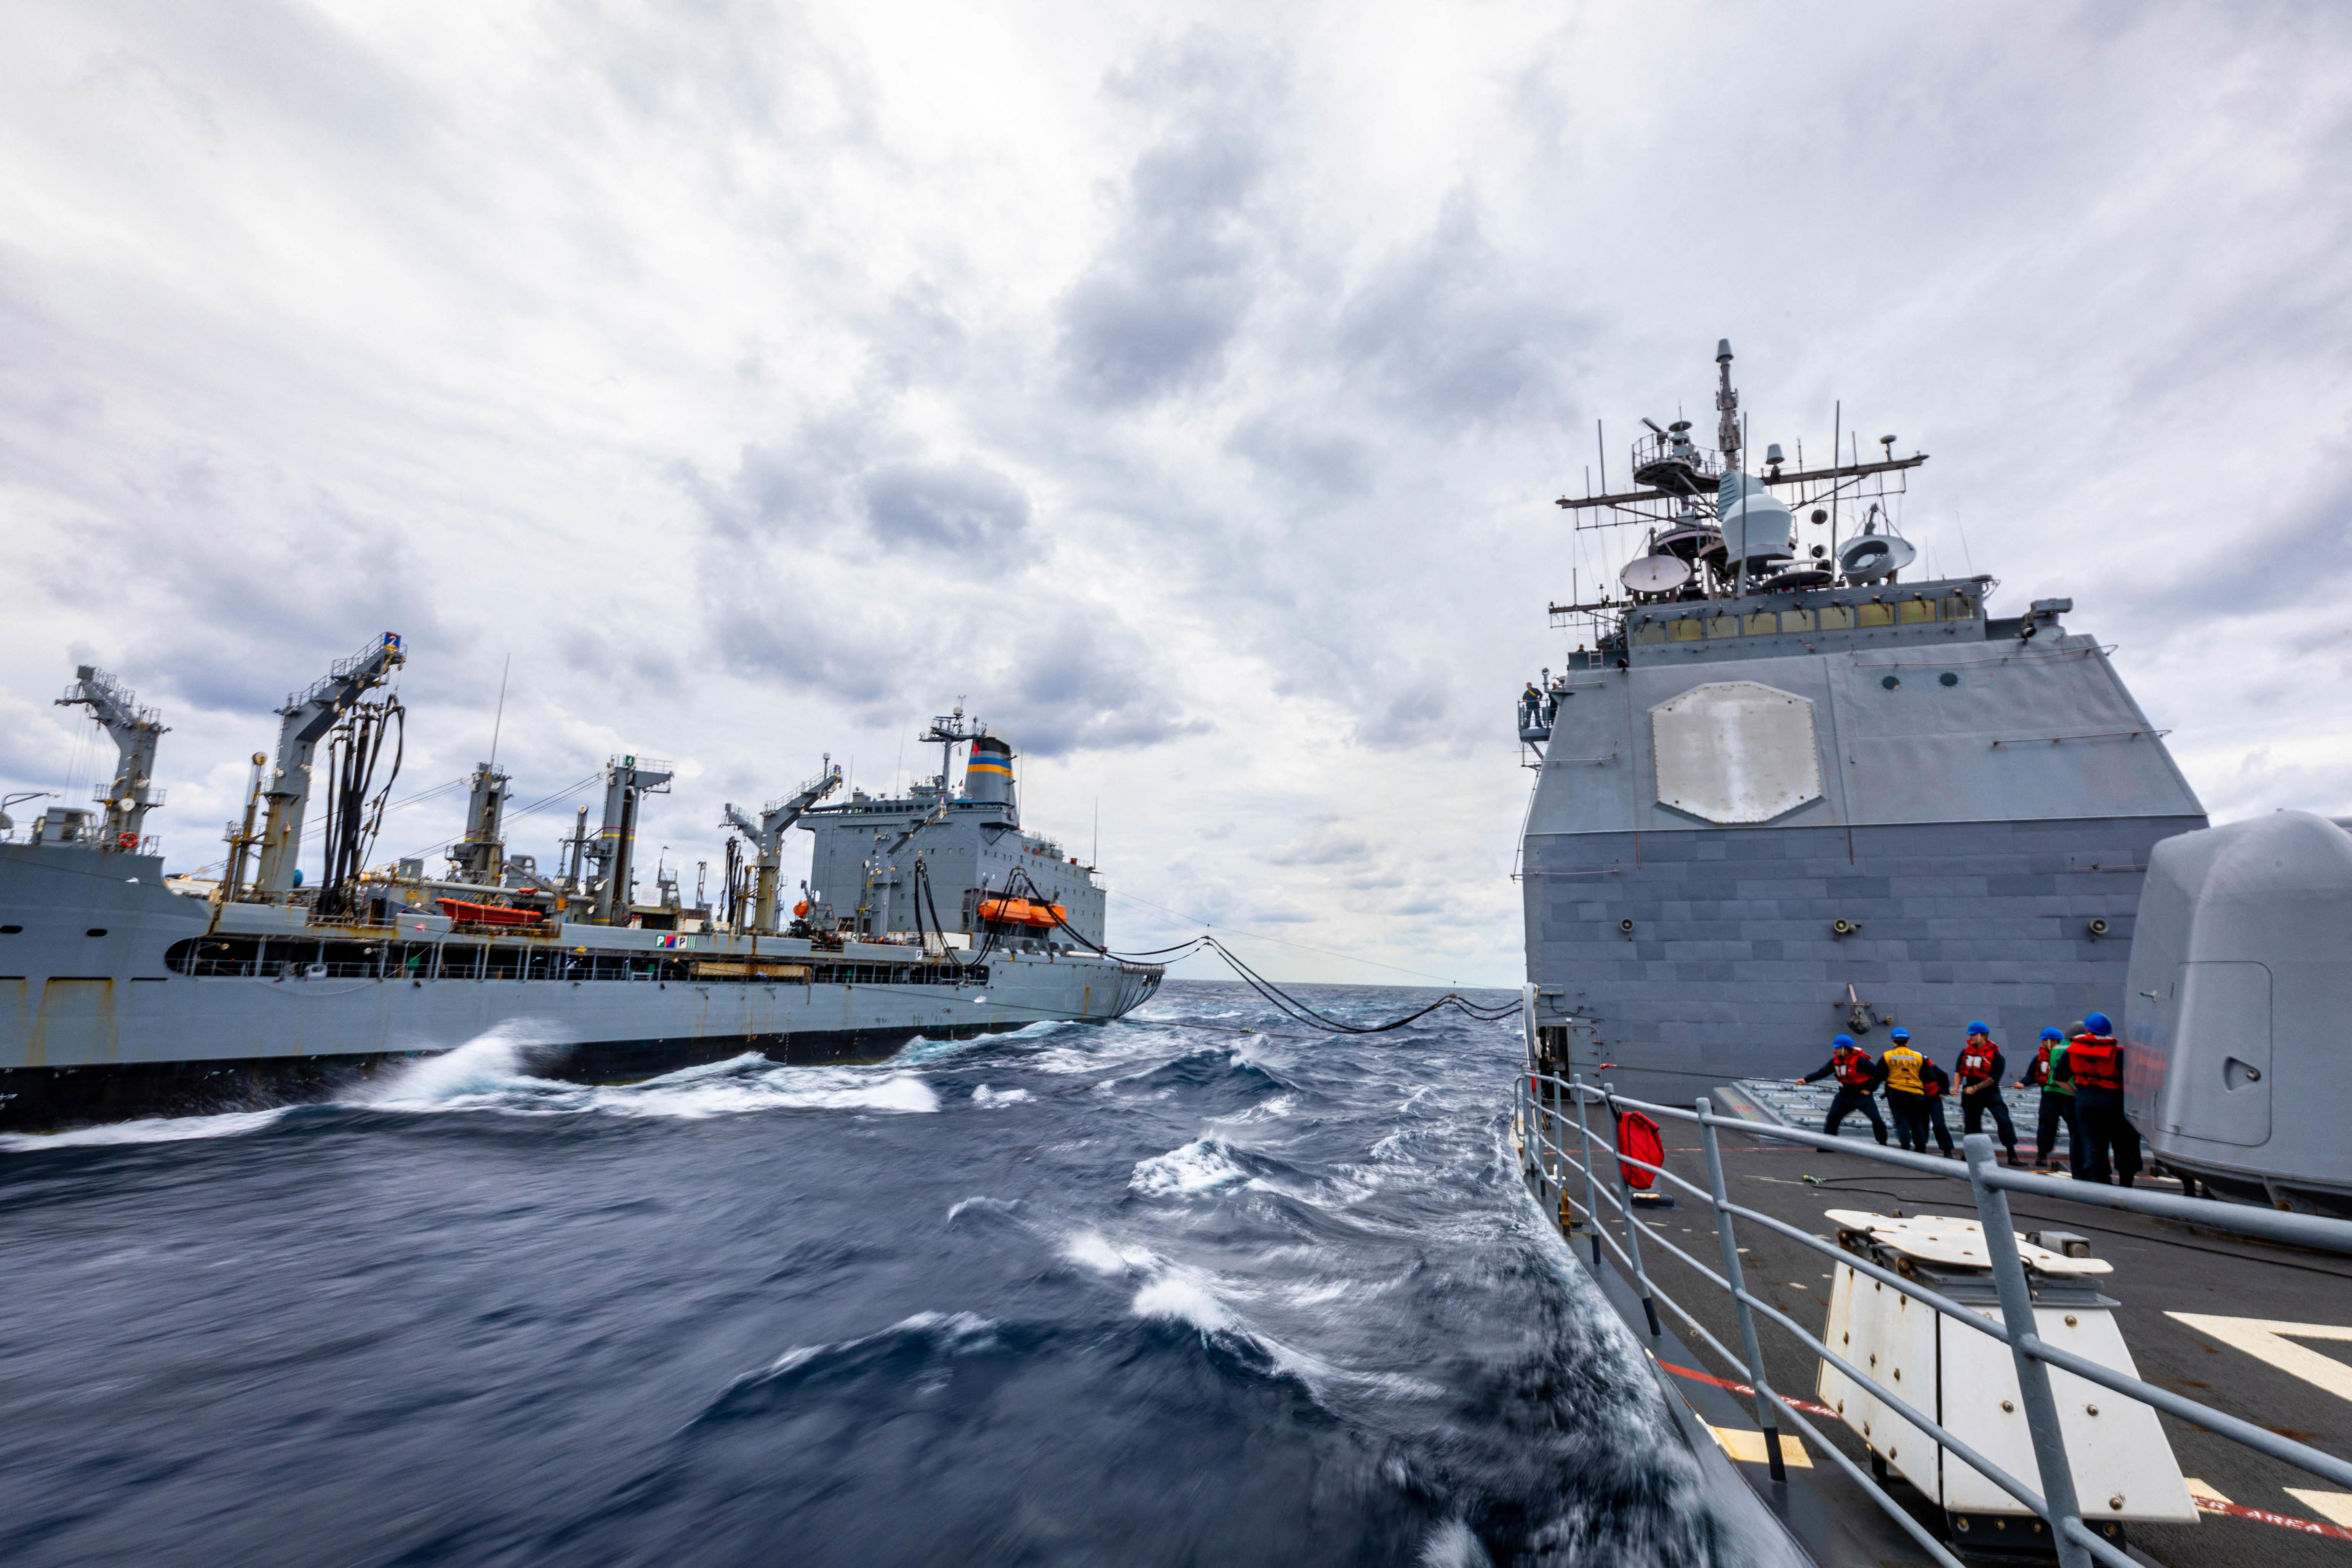 Handout photo dated October 28 2022 of the Ticonderoga-class guided-missile cruiser USS Chancellorsville (CG 62) conducts a replenishment-at-sea with the Military Sealift Command Henry J. Kaiser-class underway replenishment oiler USNS Yukon (T-AO-202) in the Philippine Sea. Chancellorsville is forward-deployed to the U.S. 7th Fleet in support of security and stability in the Indo-Pacific and is assigned to Commander, Task Force 70, a combat-ready force that protects and defends the collective maritime interest of its allies and partners in the region. U.S. Navy photo by Mass Communication Specialist 2nd Class Justin Stack via ABACAPRESS.COM